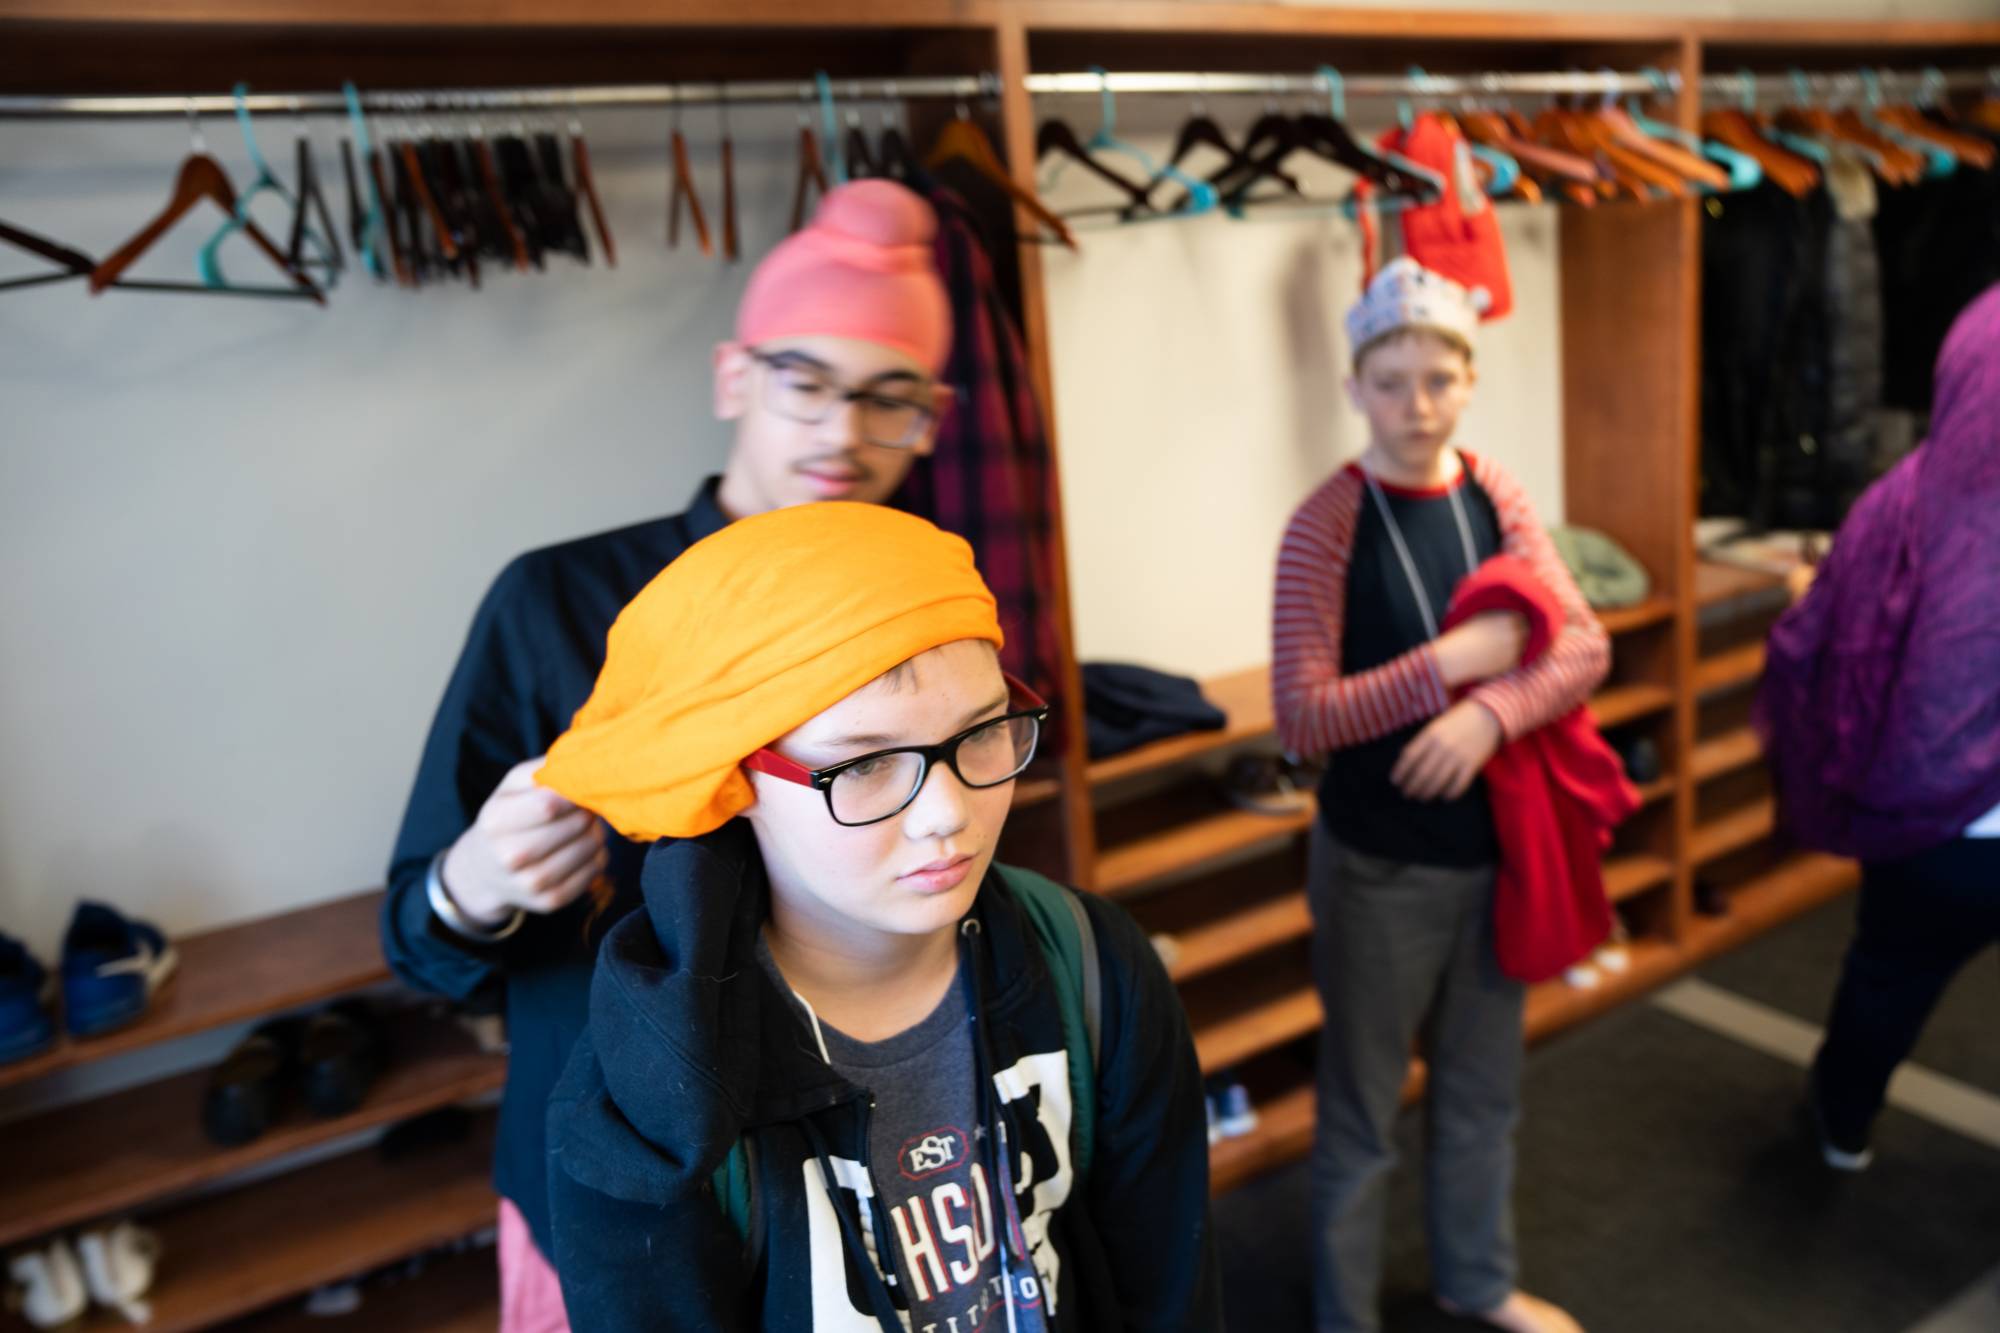 Student receiving a Sikh turban during site visit